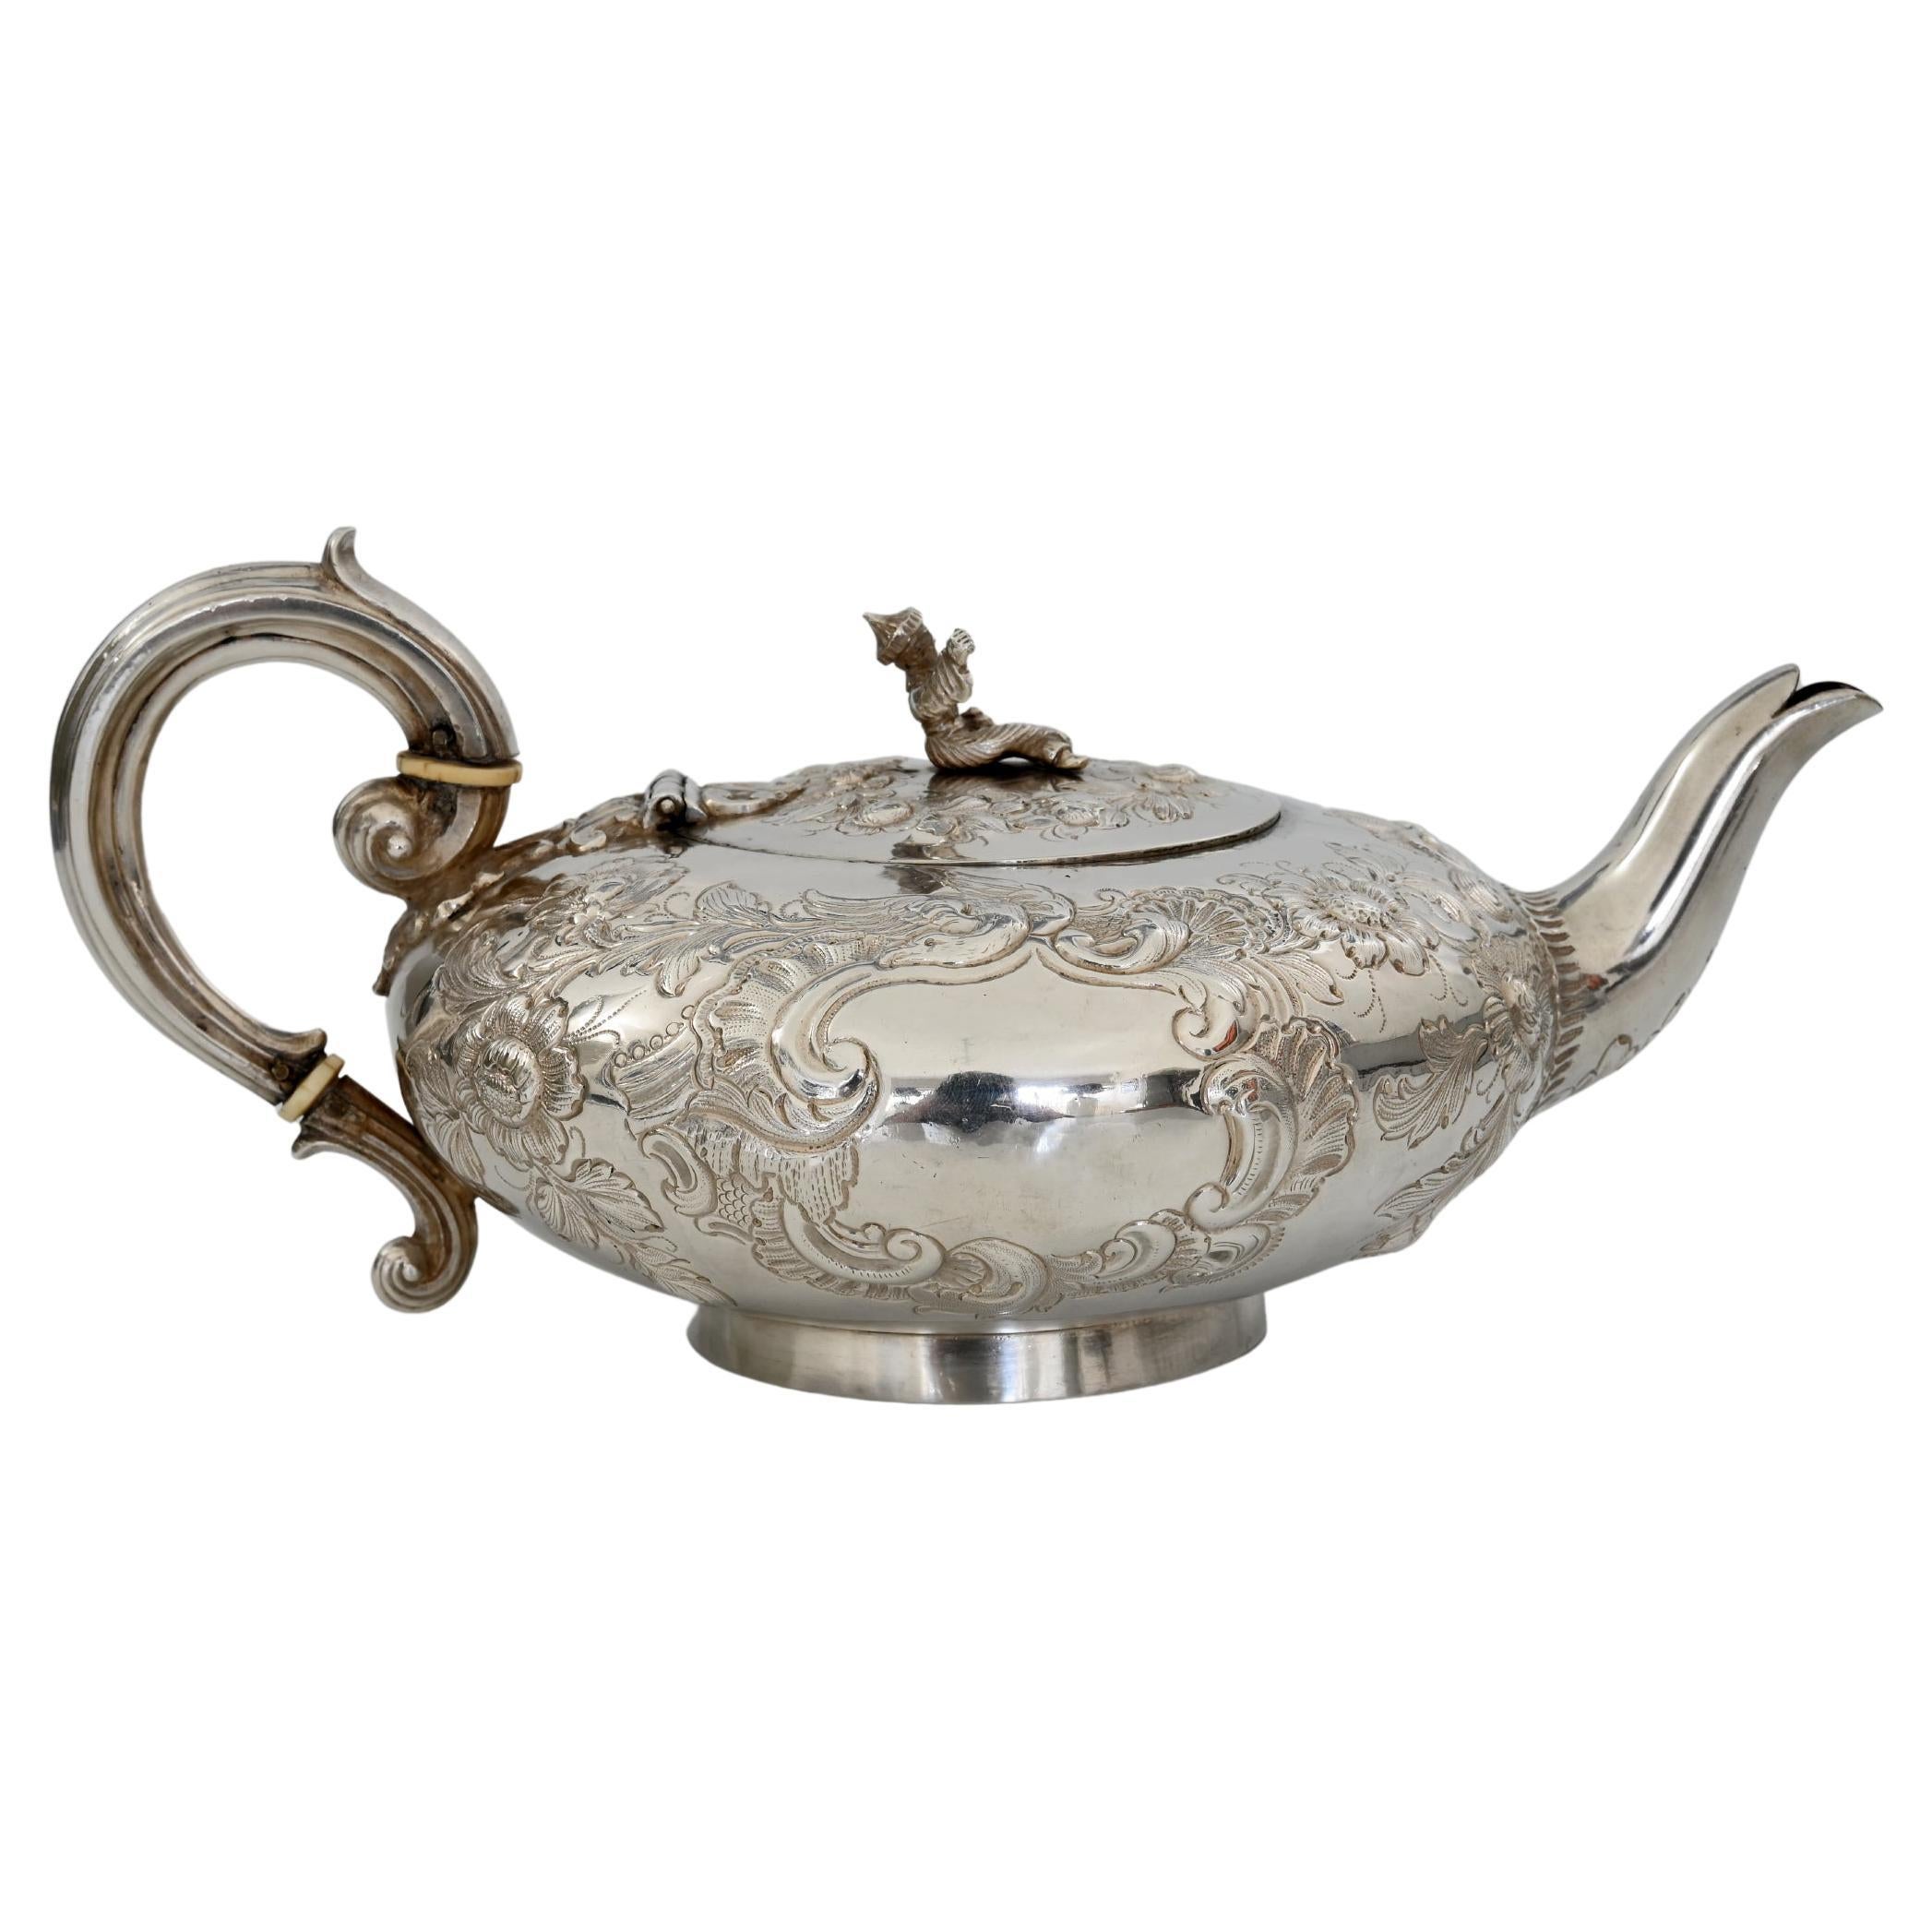 Especially beautiful small teapot by Carl Weishaupt Munich, worked in 1833.
Very nice silversmith work, pressed and bulged, provided with an oriental as a crown. Reliefed with rocaille cartouches and flowers.
The jug pours very nicely and feels